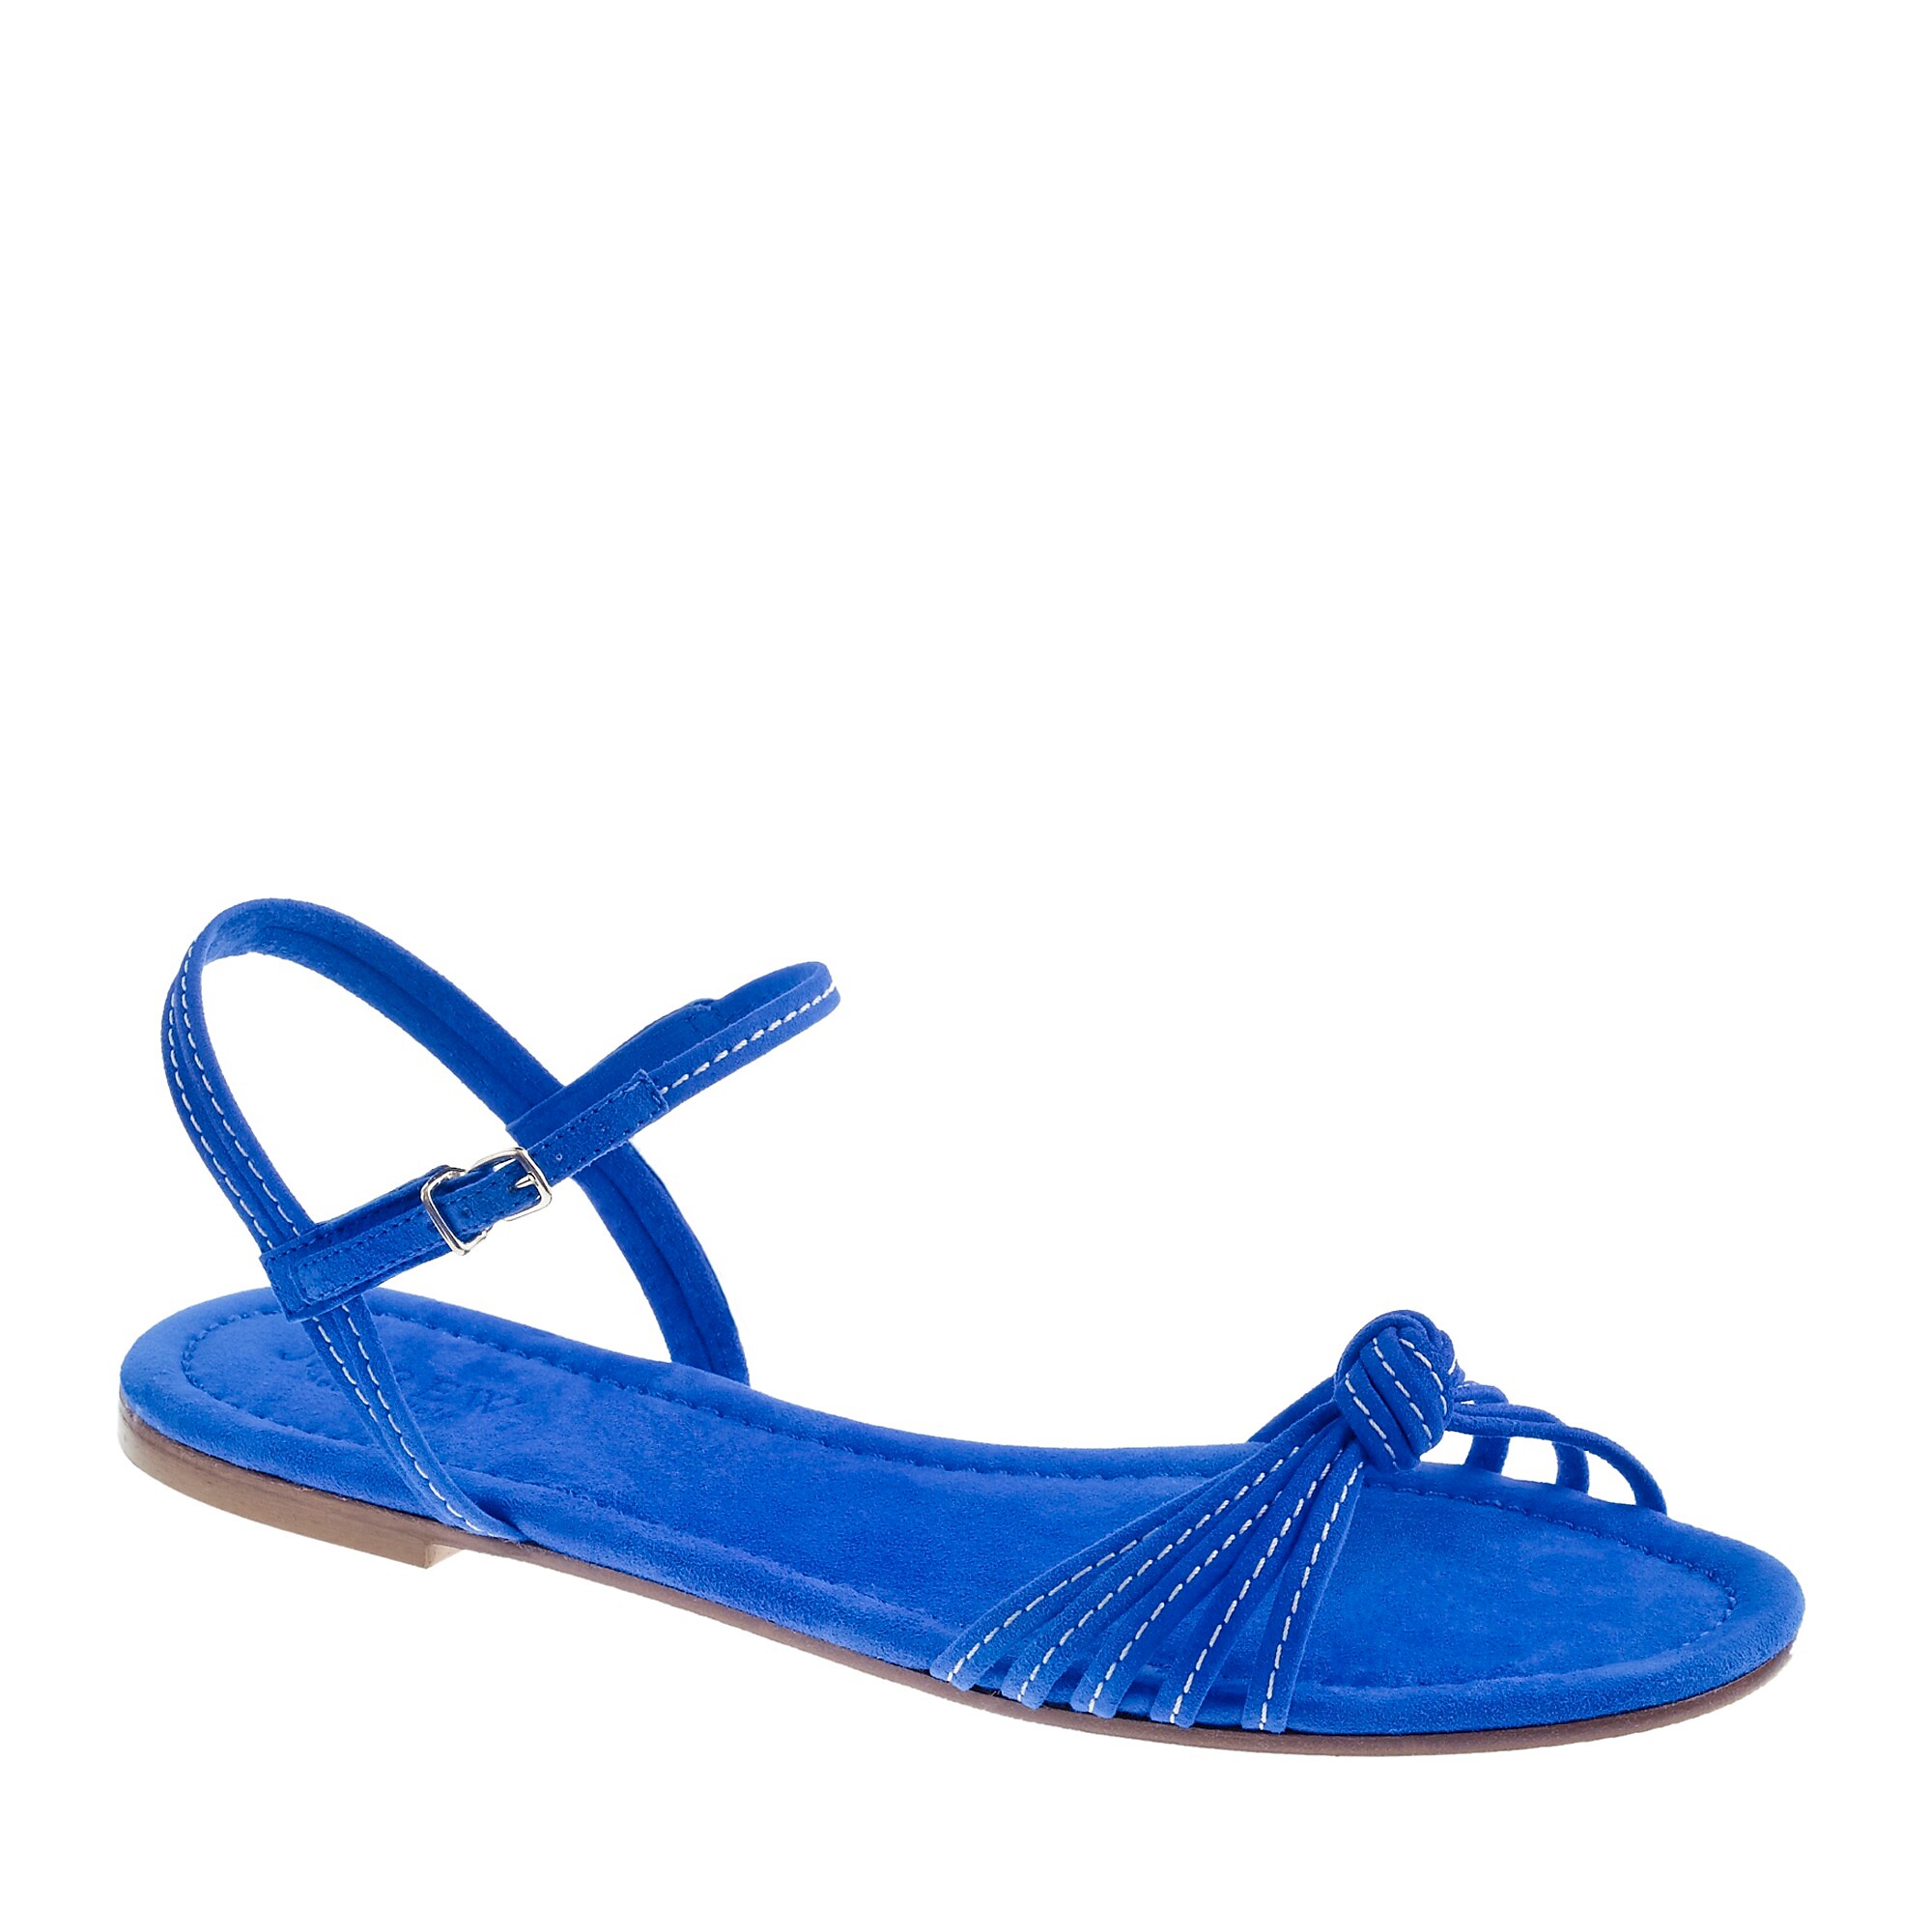 Ready-or-not suede sandals : Women sandals | J.Crew